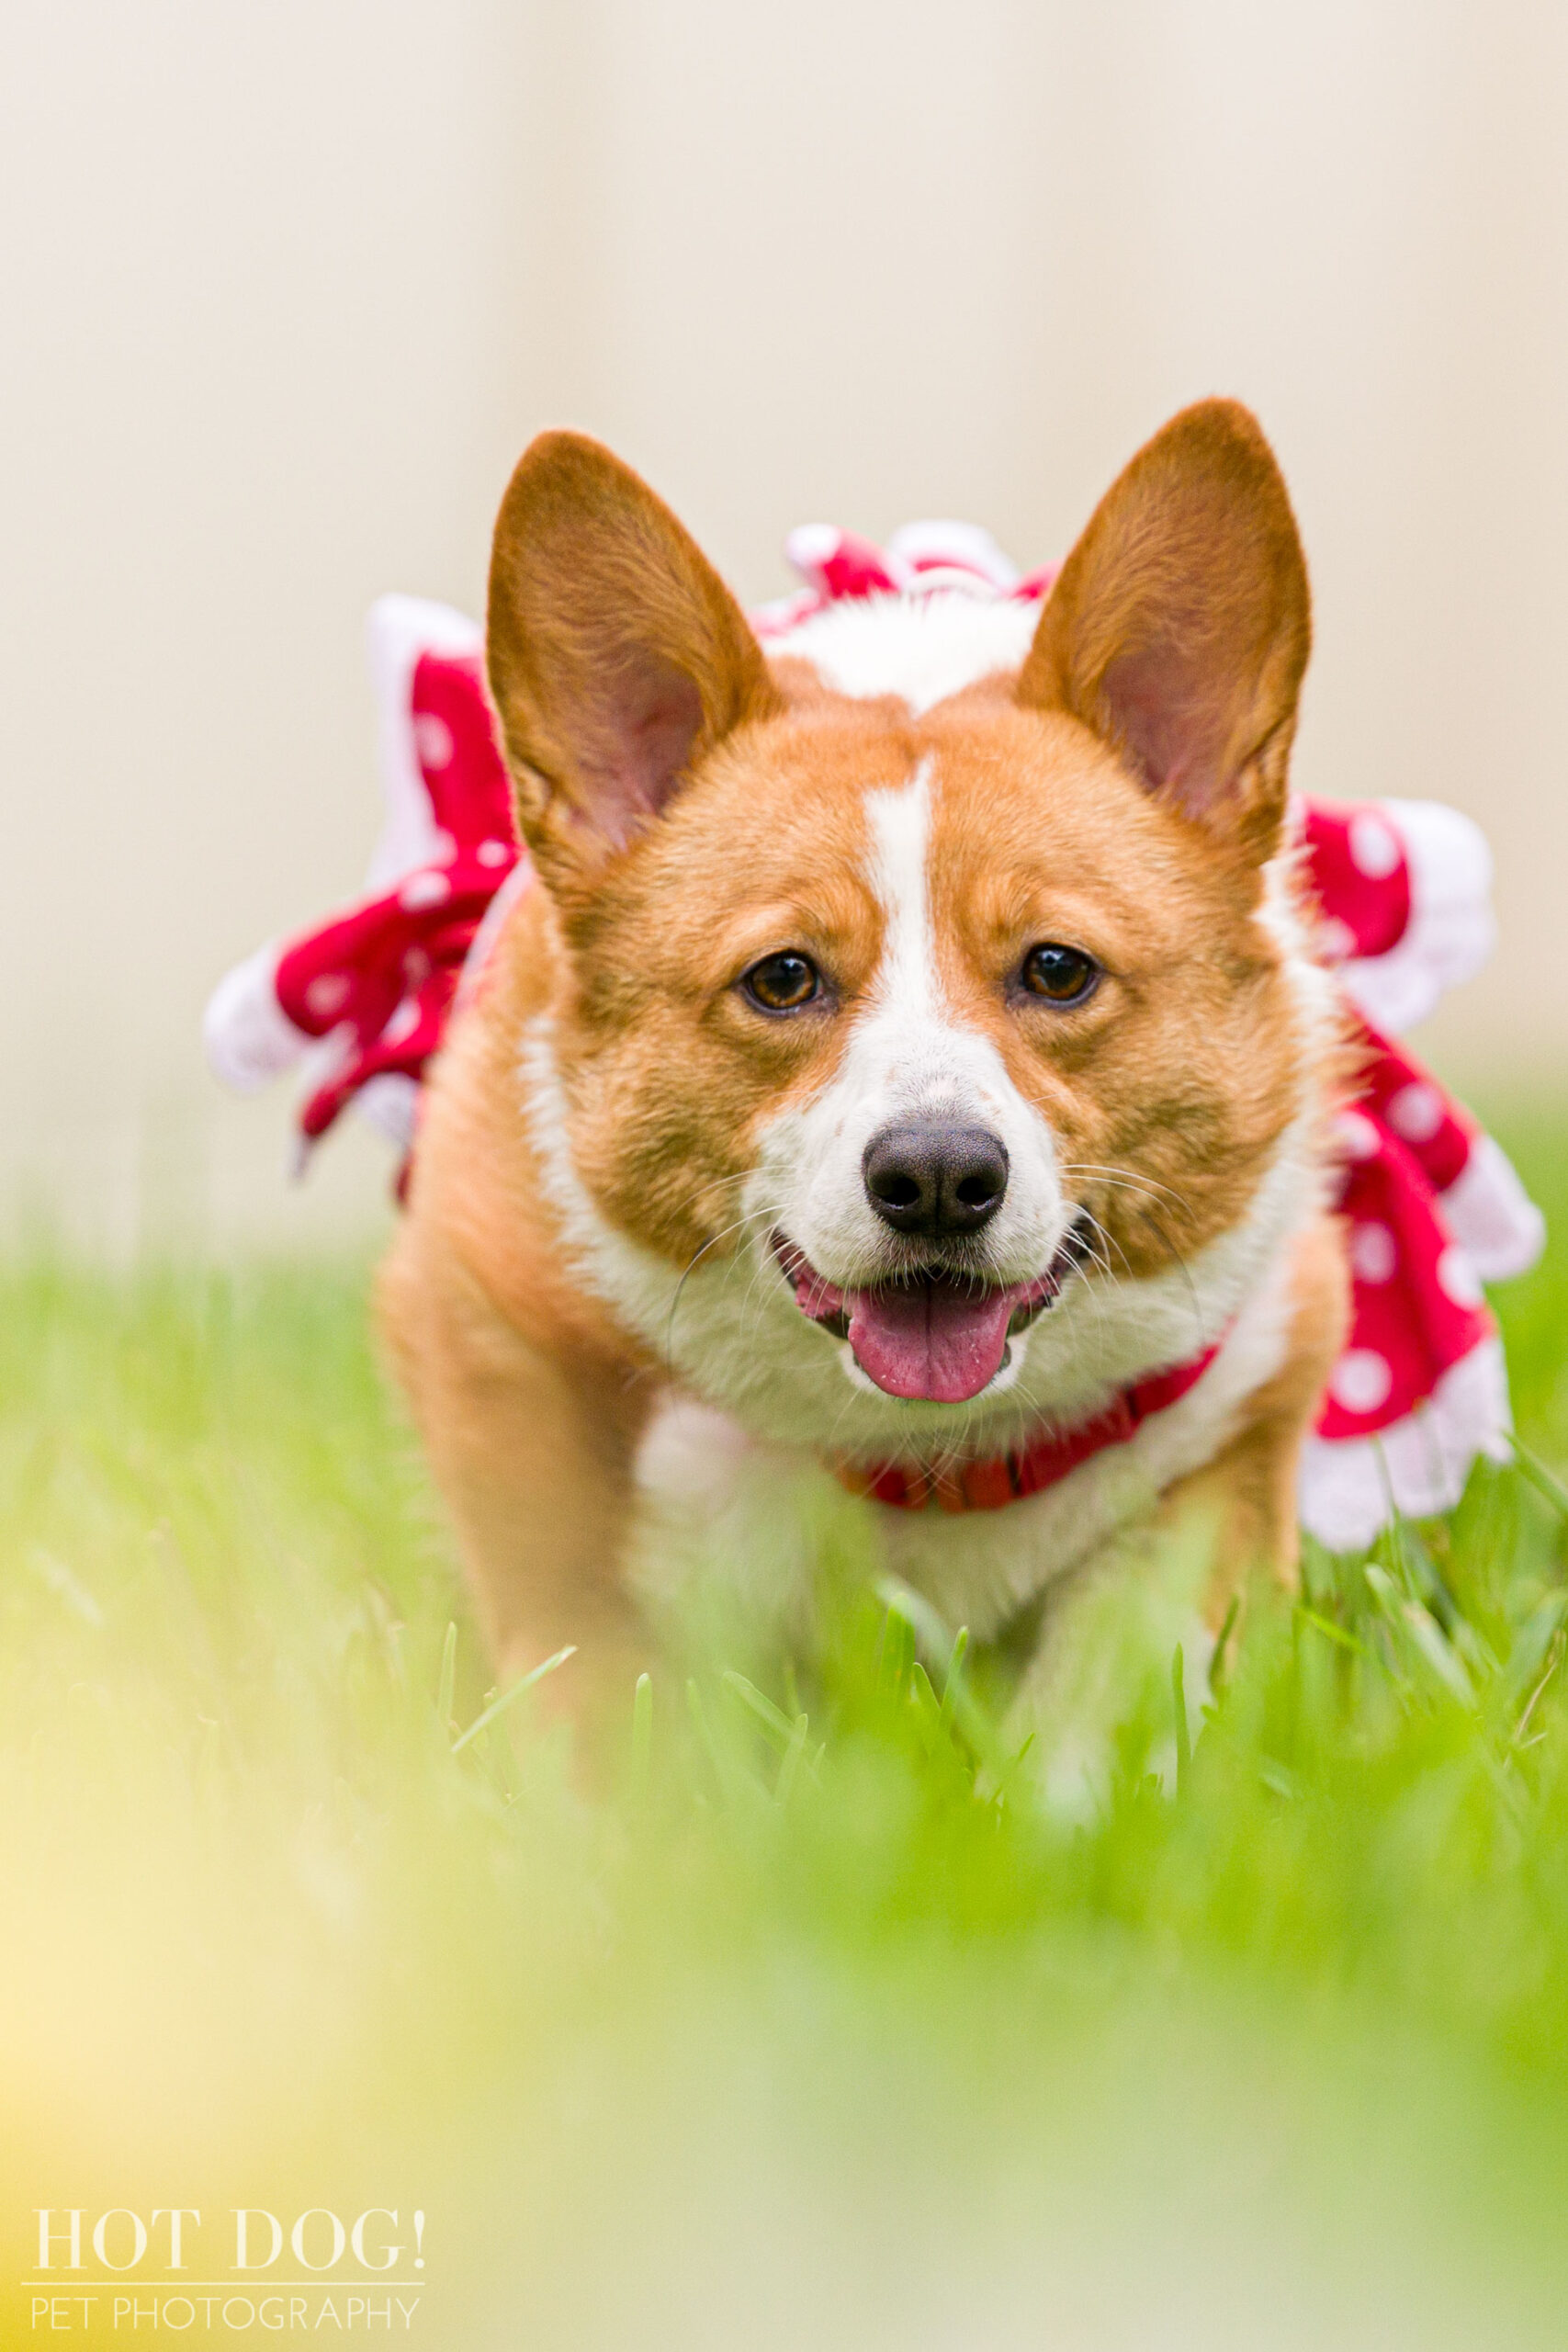 Cinnamon the Pembroke Welsh Corgi is a natural in front of the camera in this professional pet photo session by Hot Dog! Pet Photography.